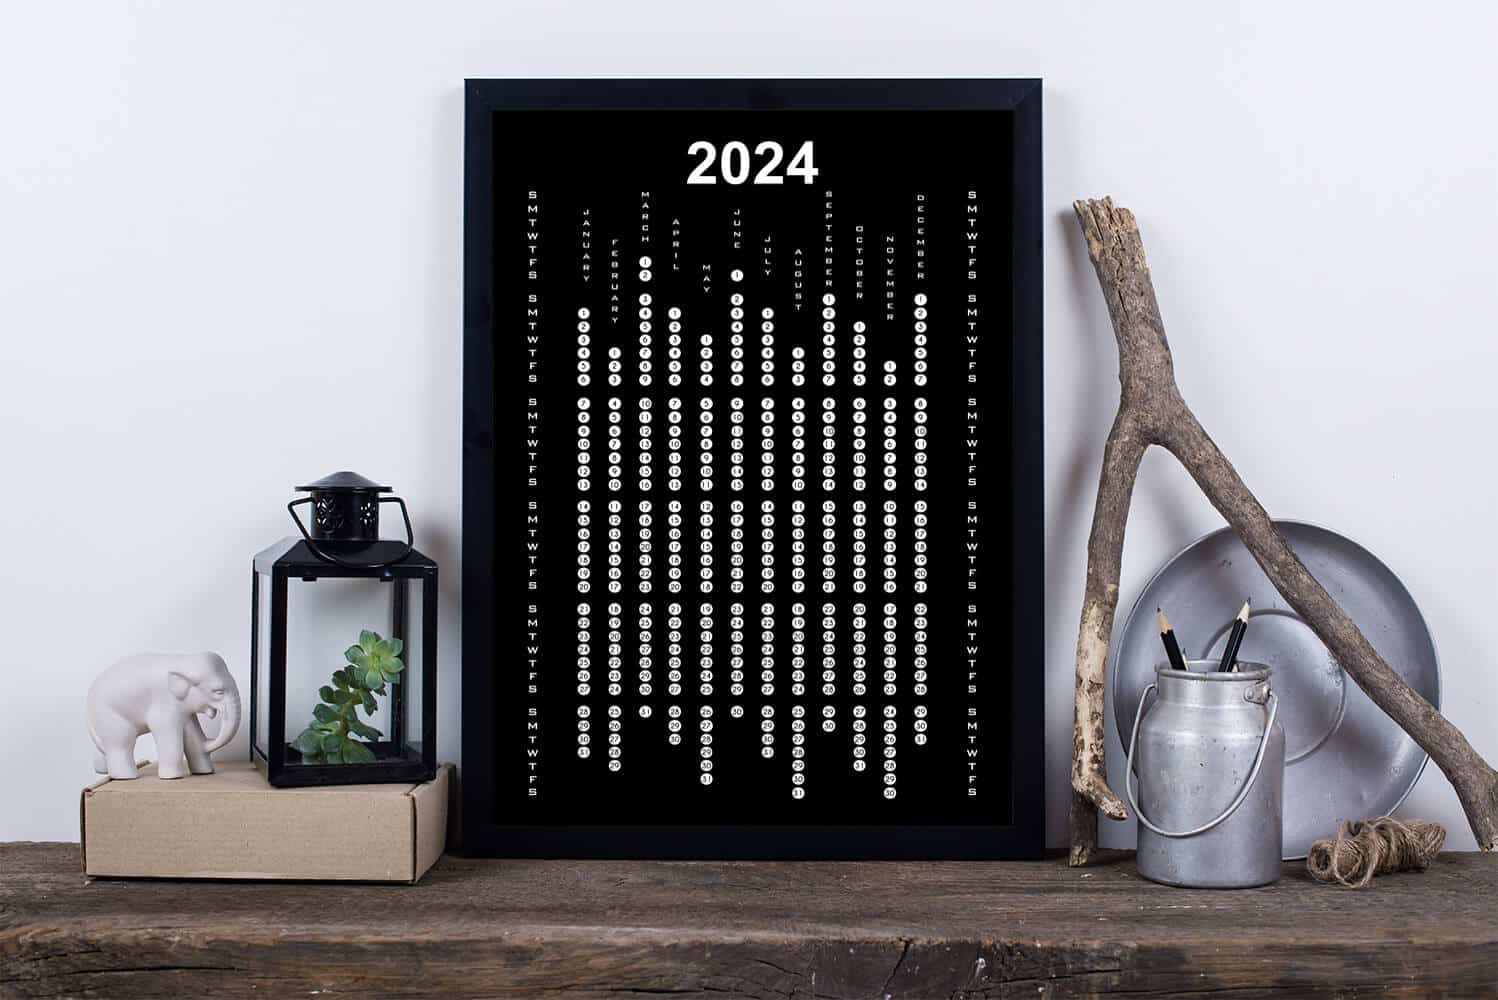 Magnetic Calendar 2023-2024 - 11 x 14 inches Magnetic Calendar for